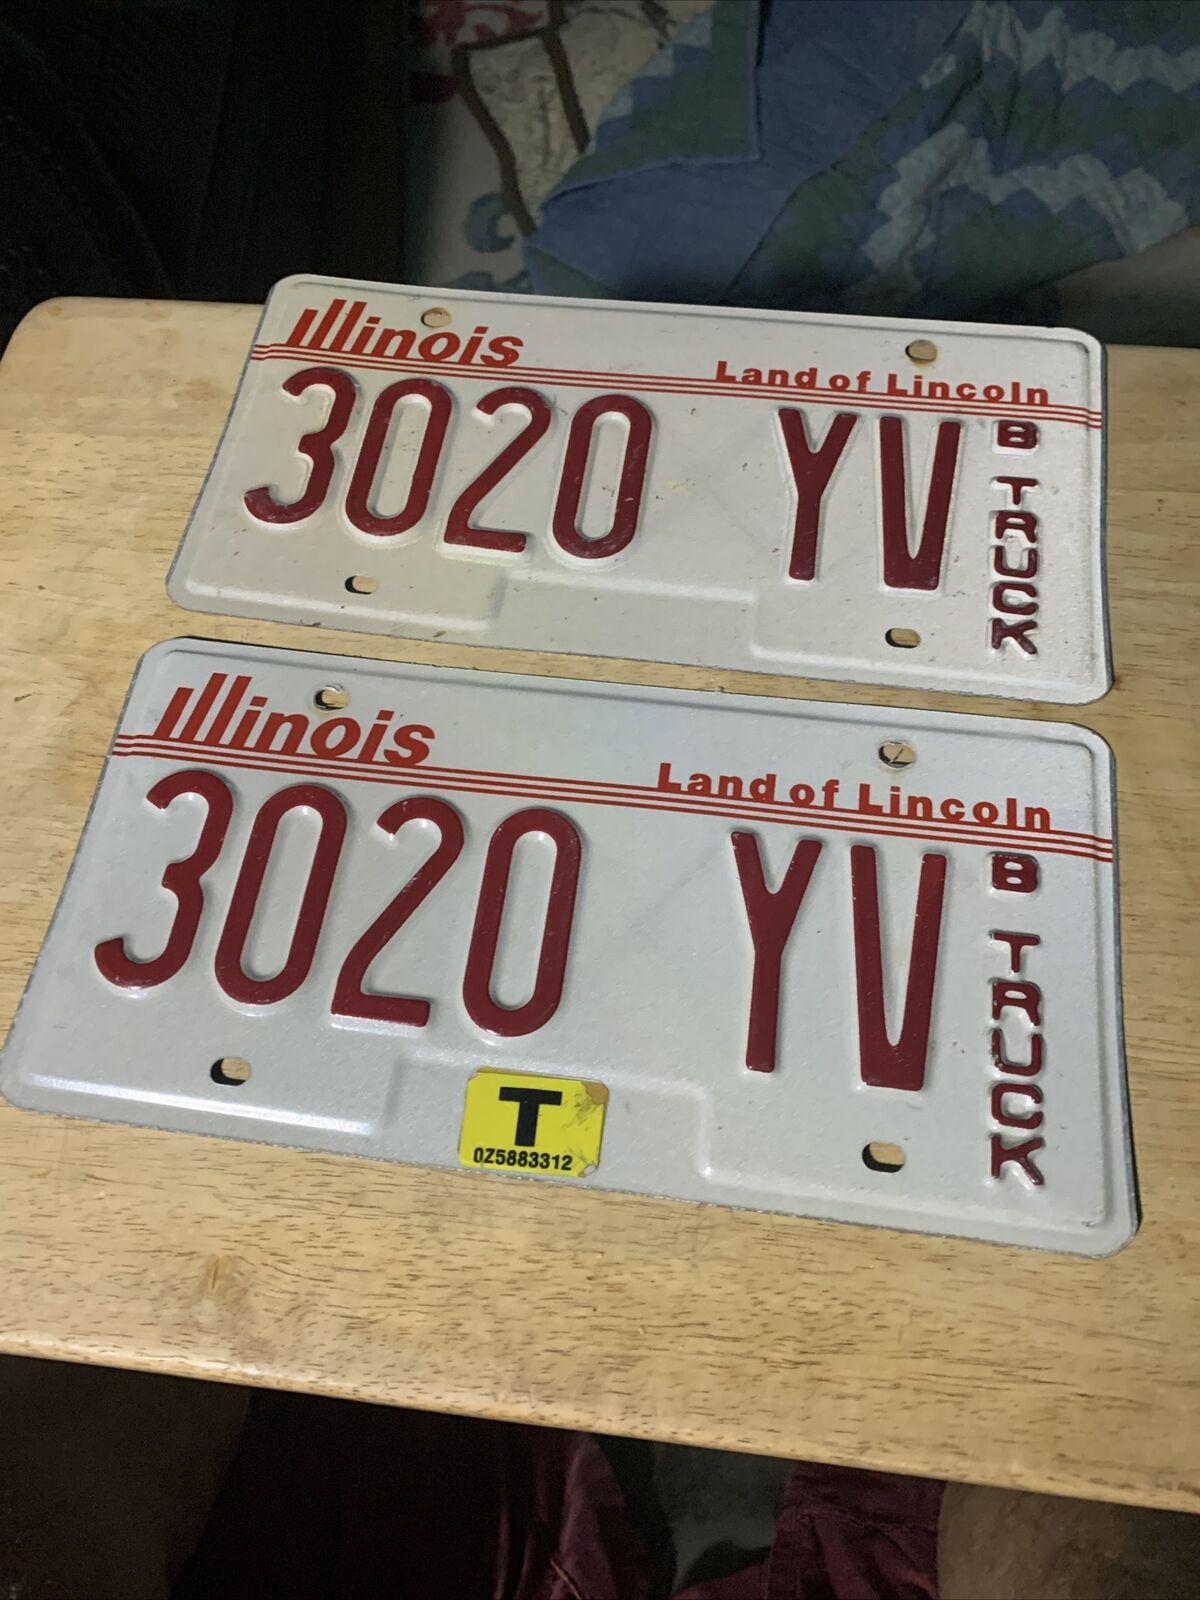 2-2003- ILLINOIS B TRUCK LICENSE PLATES - 3020 YV - 18 Years Old